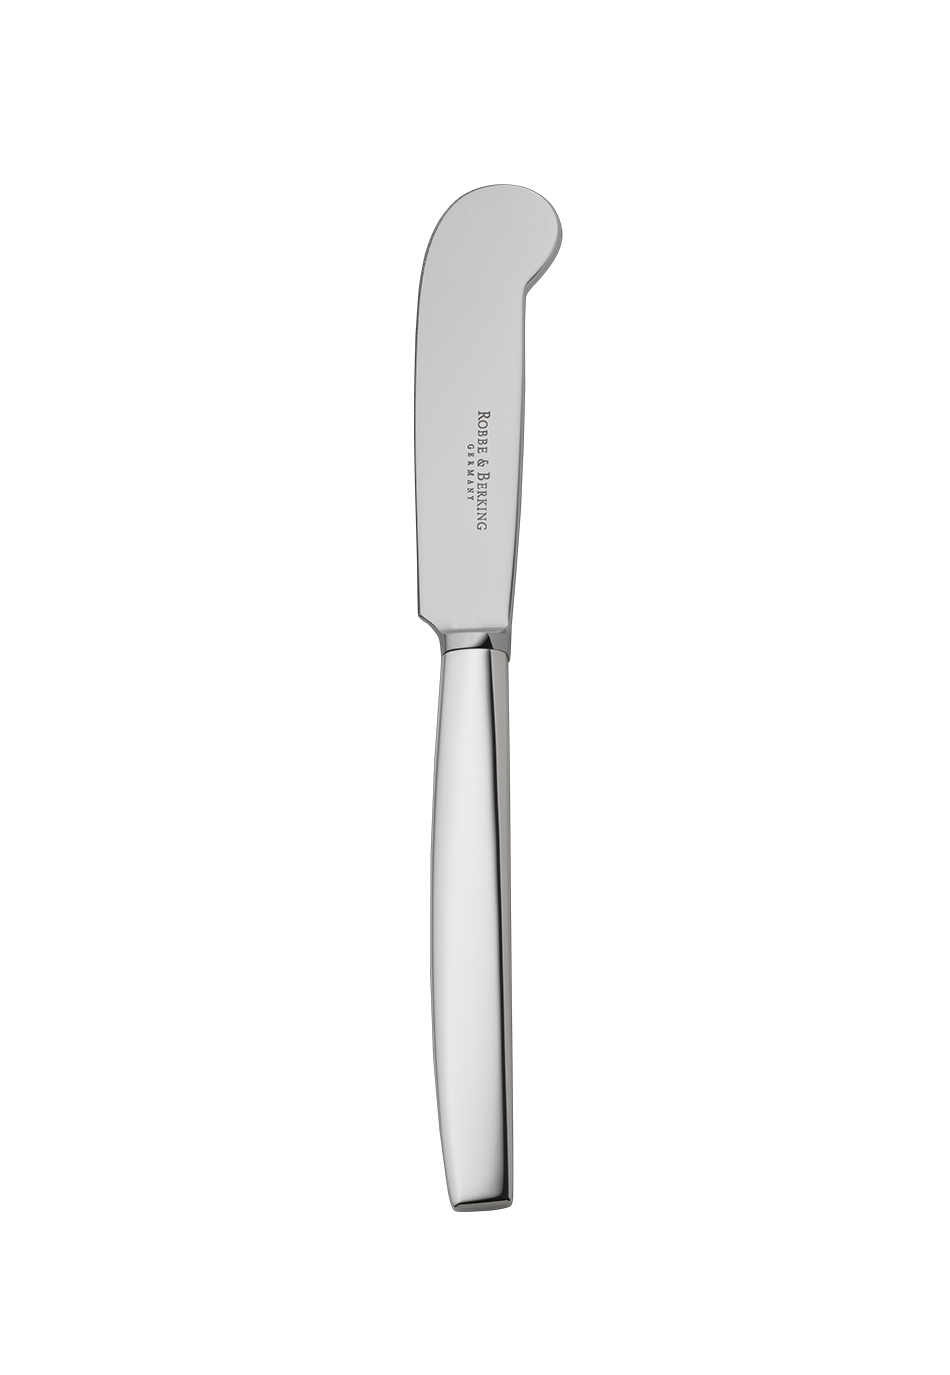 12" Butter Knife (150g massive silverplated)